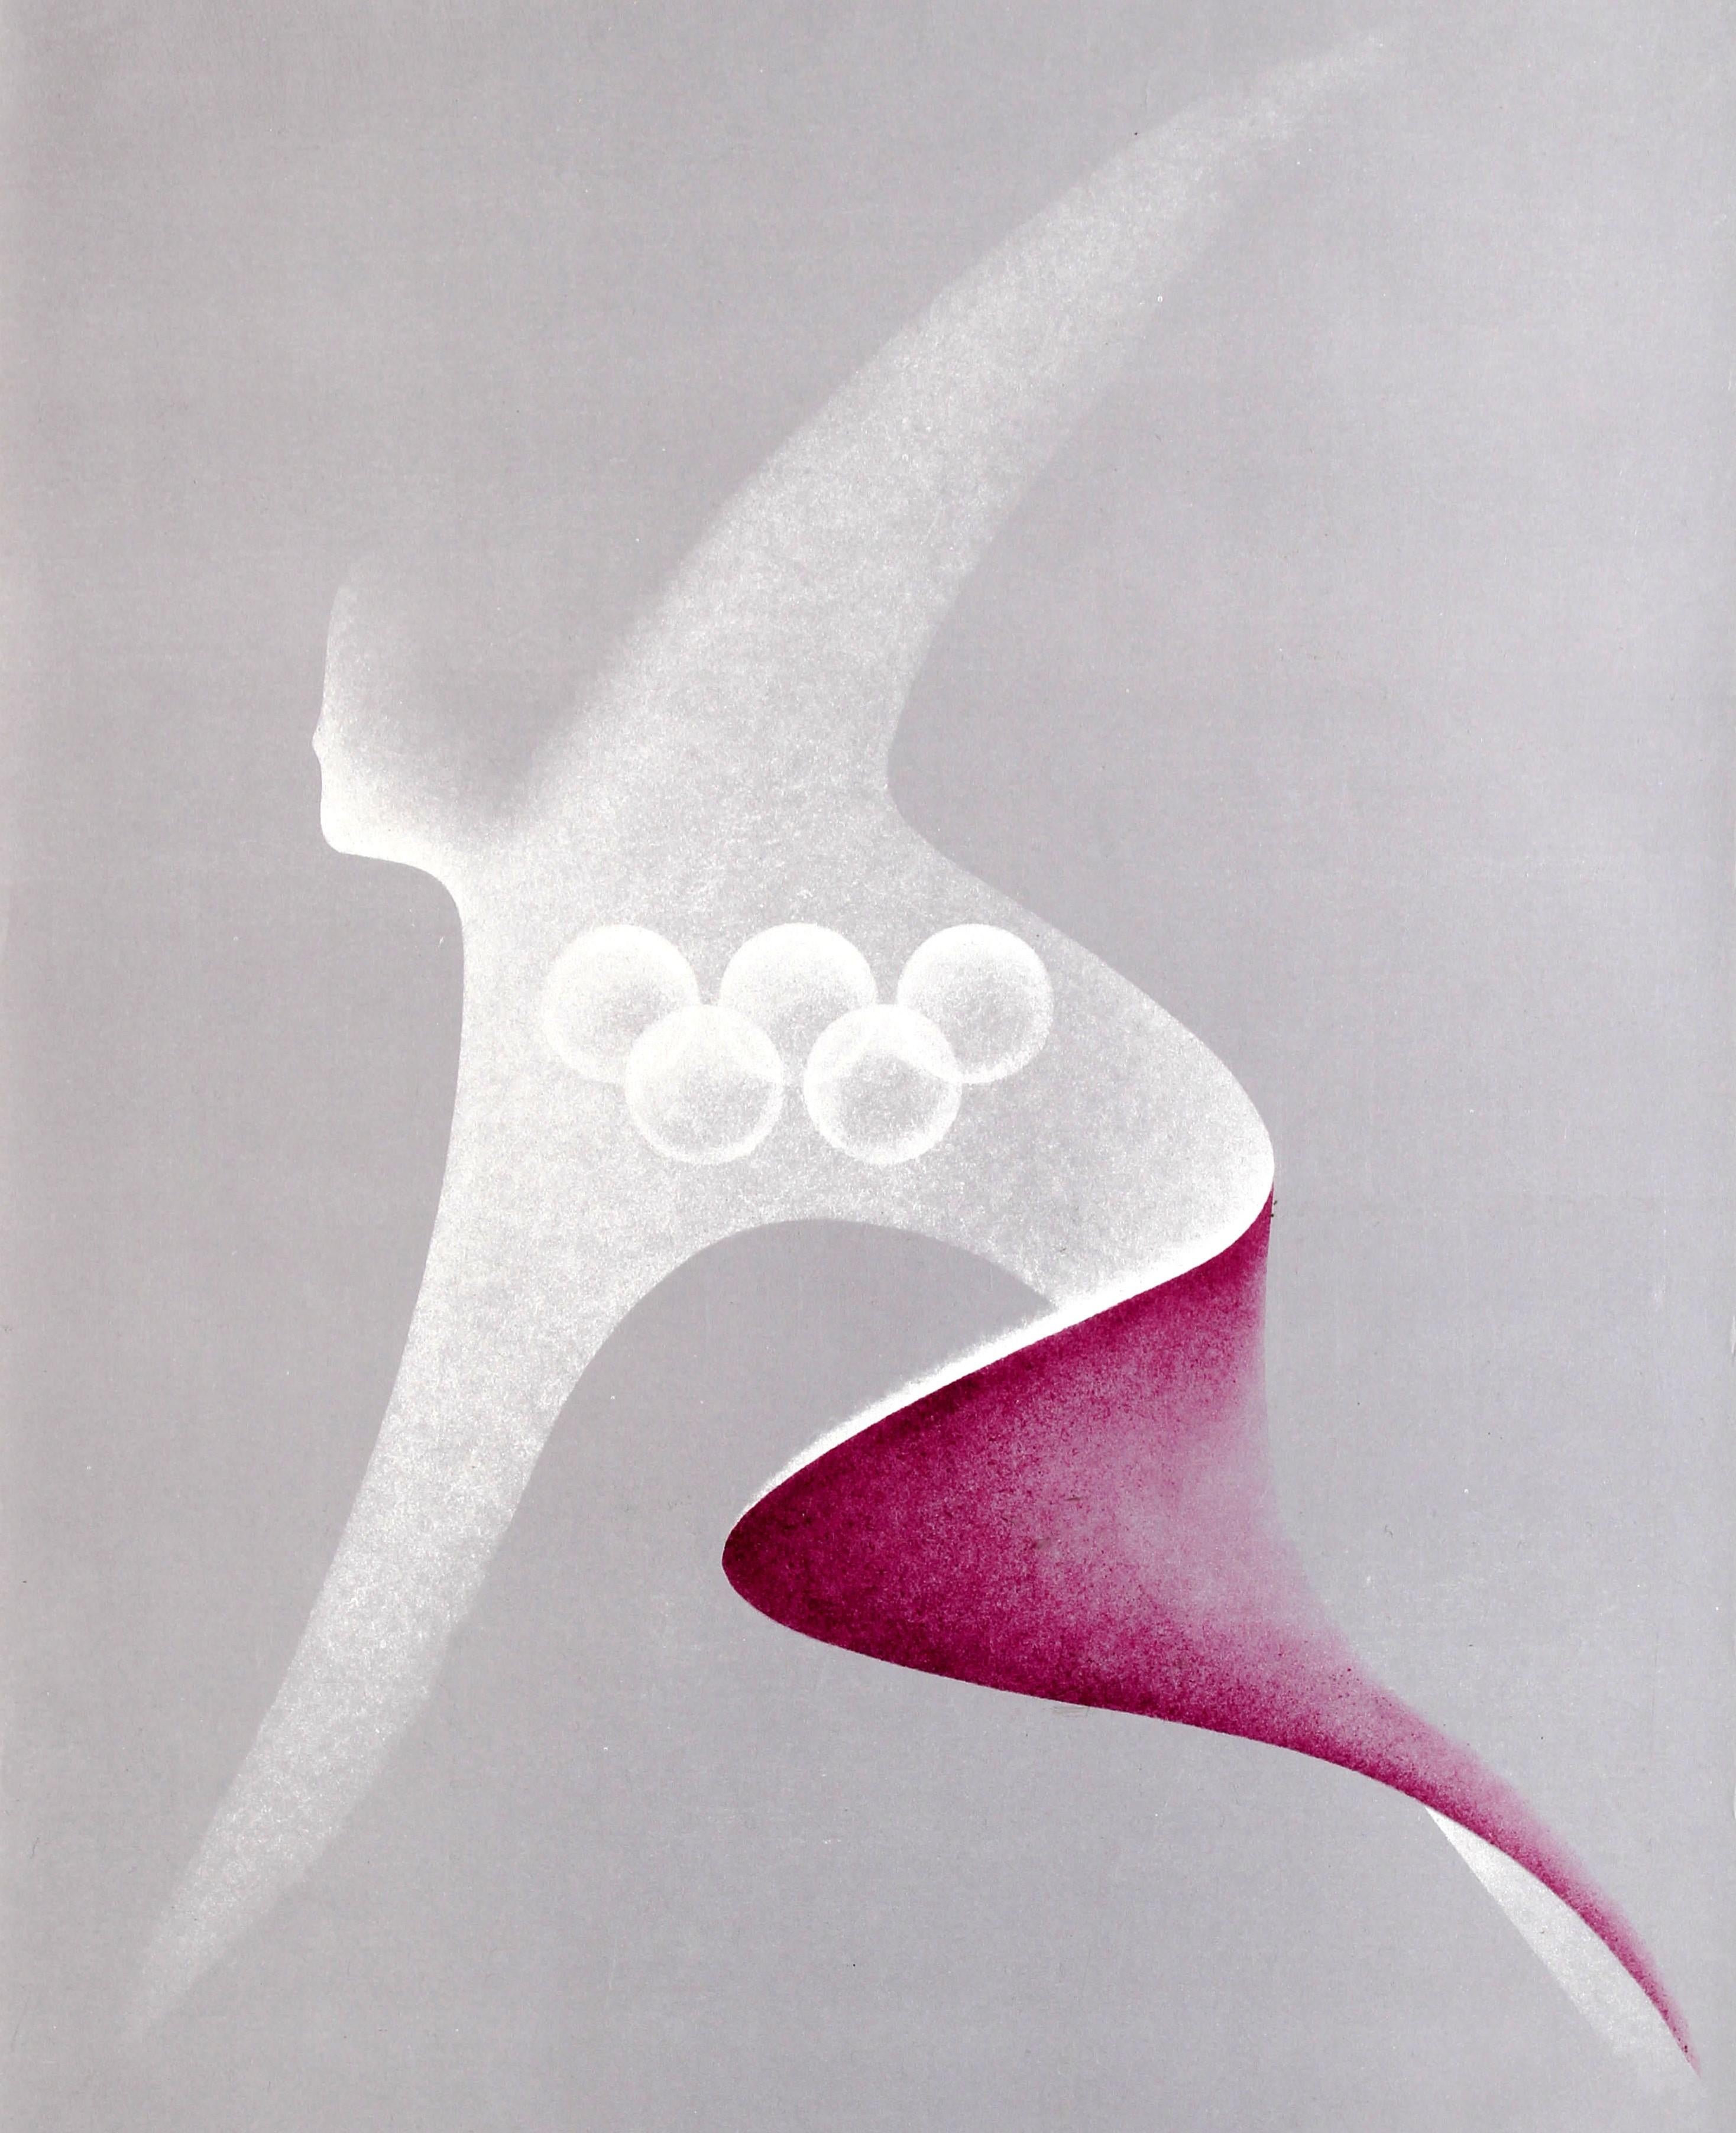 Original vintage Soviet sport poster for the 22nd Summer Olympic Games (Games of the XXII Olympiad) in 1980 held in Moscow Russia featuring a great graphic illustration by the Polish artist Karol Sliwka (1932-2018) of an athlete leaning forward and